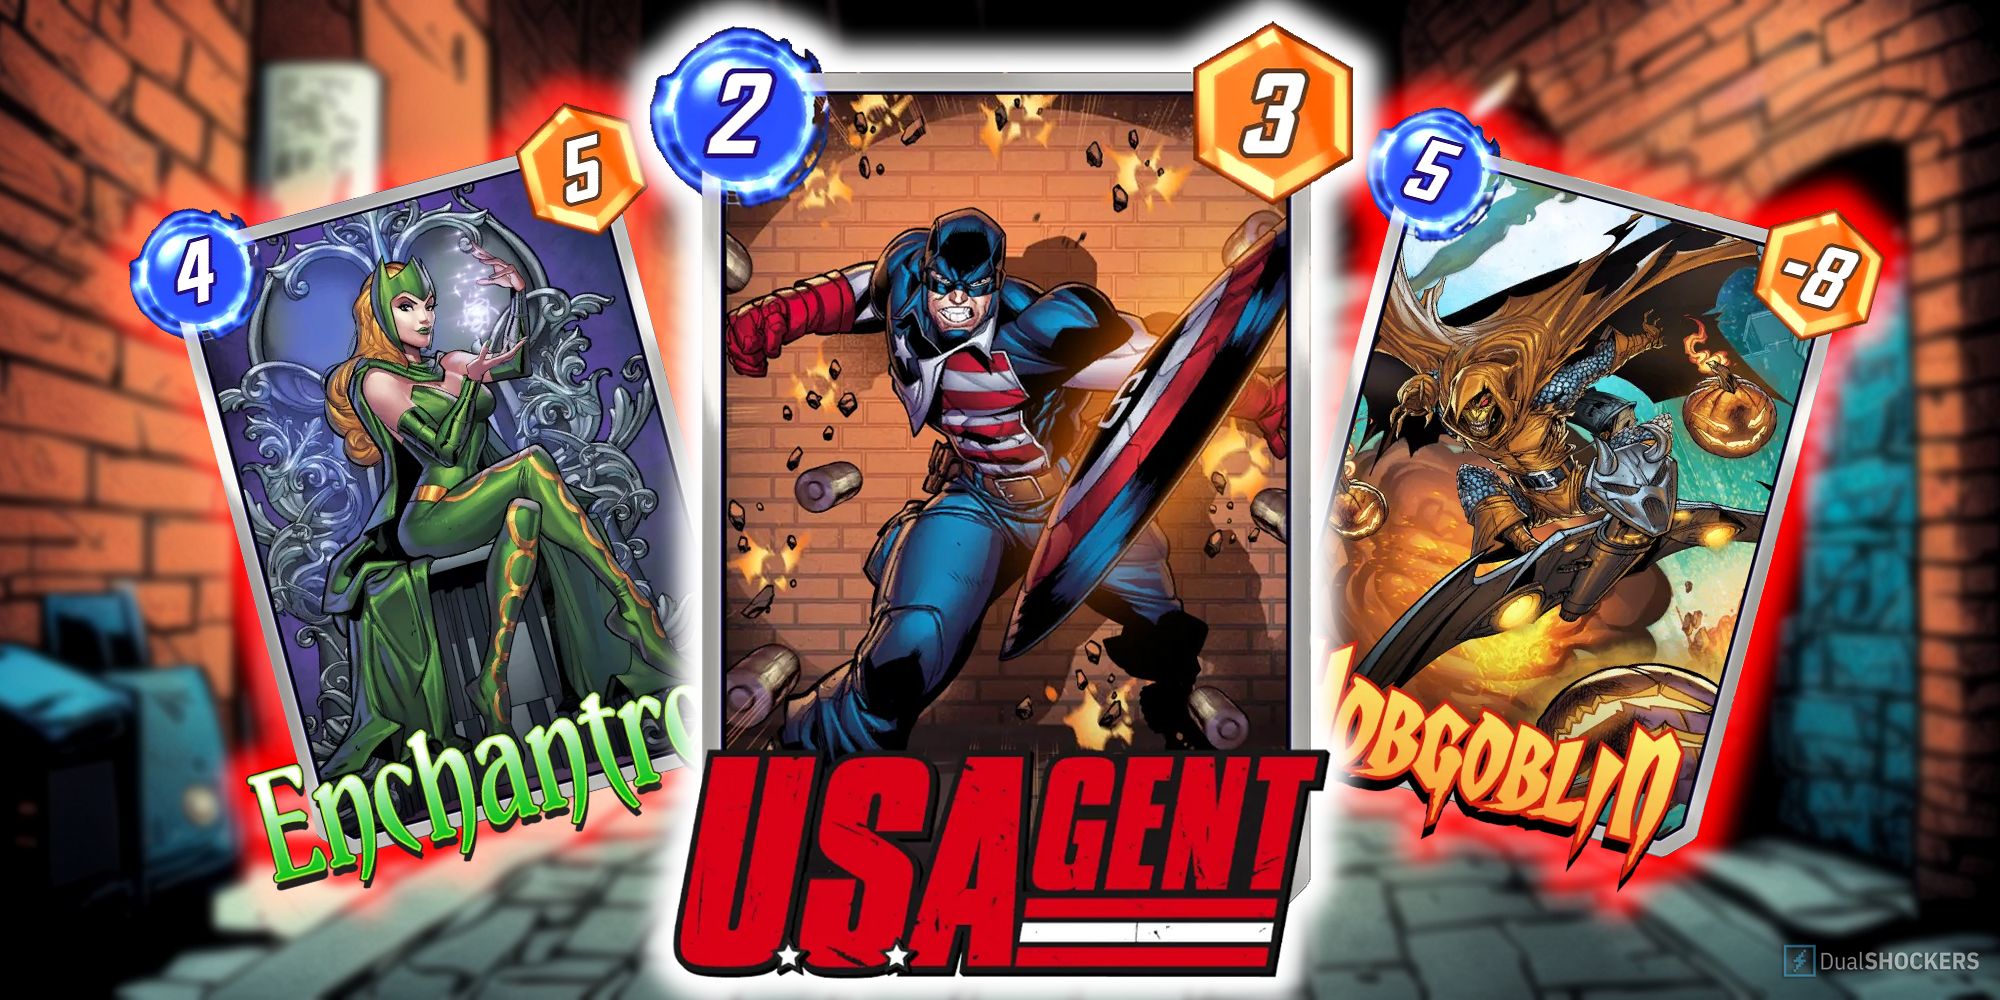 Marvel Snap's U.S. Agent card surrounded by Enchantress and Hobgoblin.